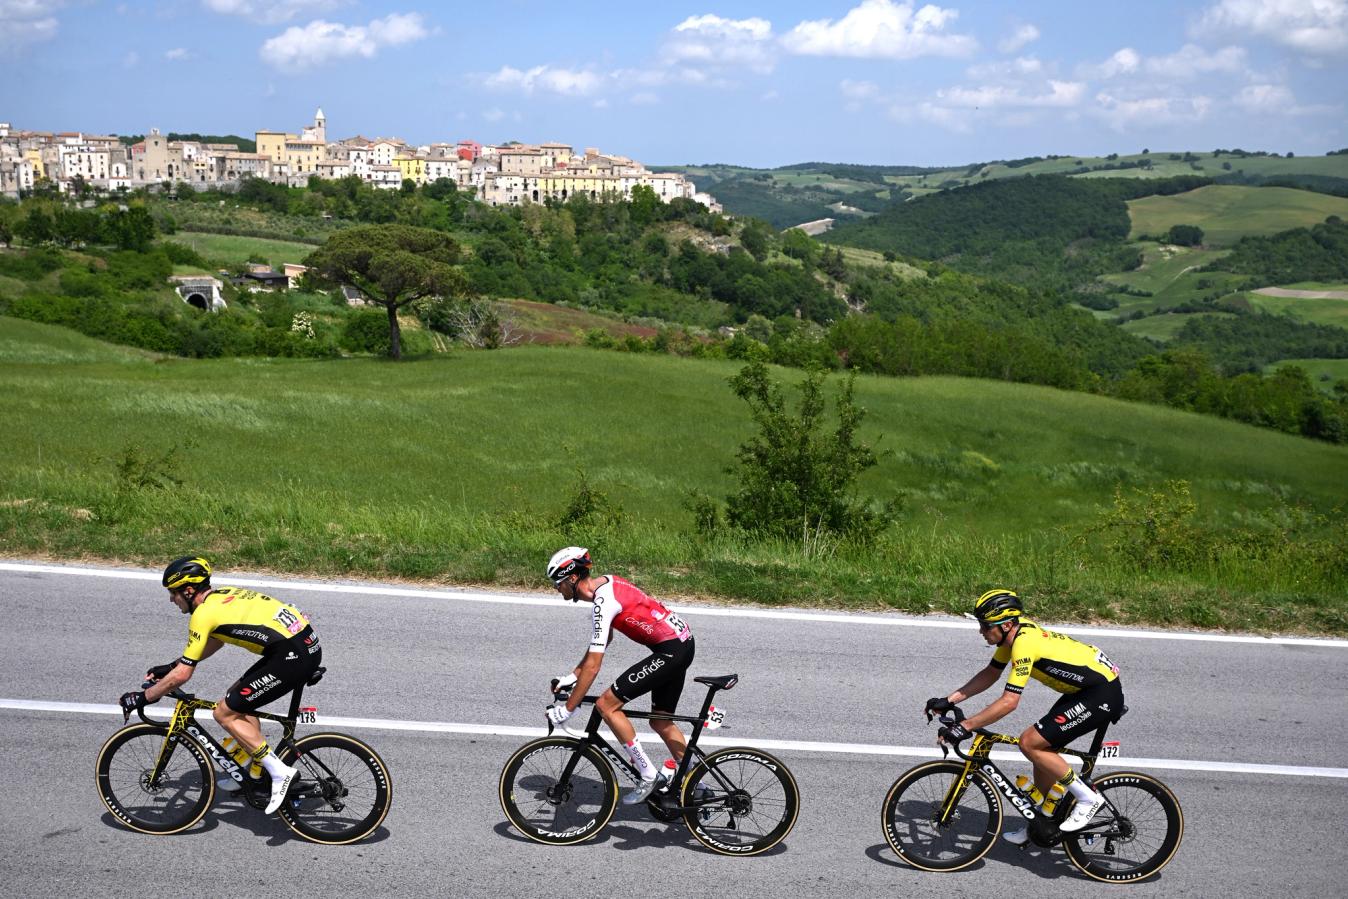 The three-man breakaway was doomed for much of the stage, but still rode on through the Italian countryside